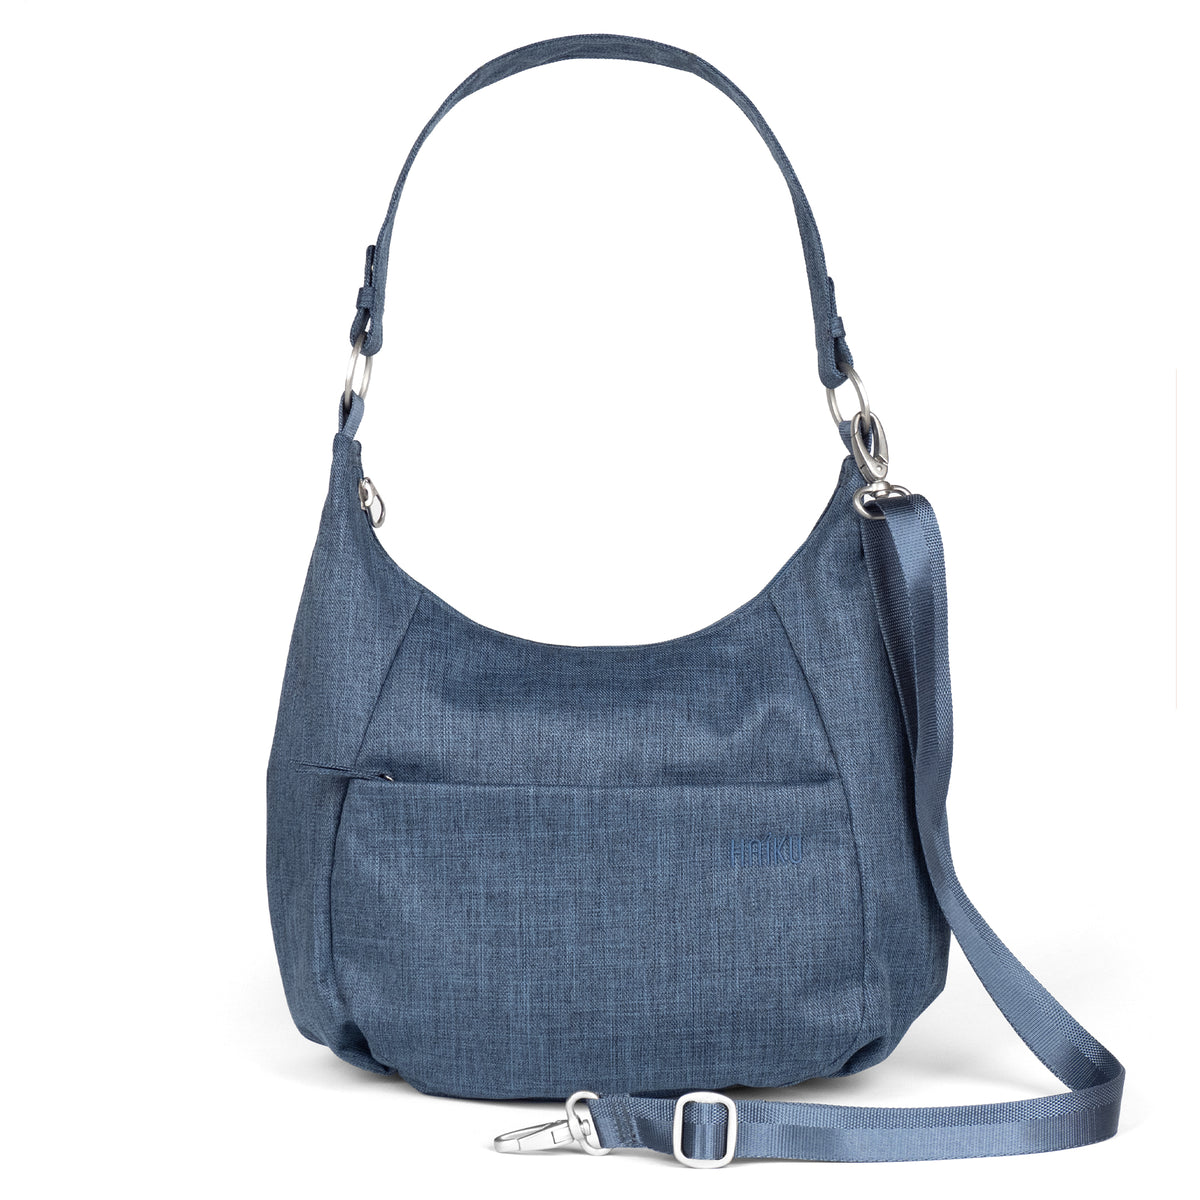 Calvin Klein Handbags Reviews  What You Need to Know - MY CHIC